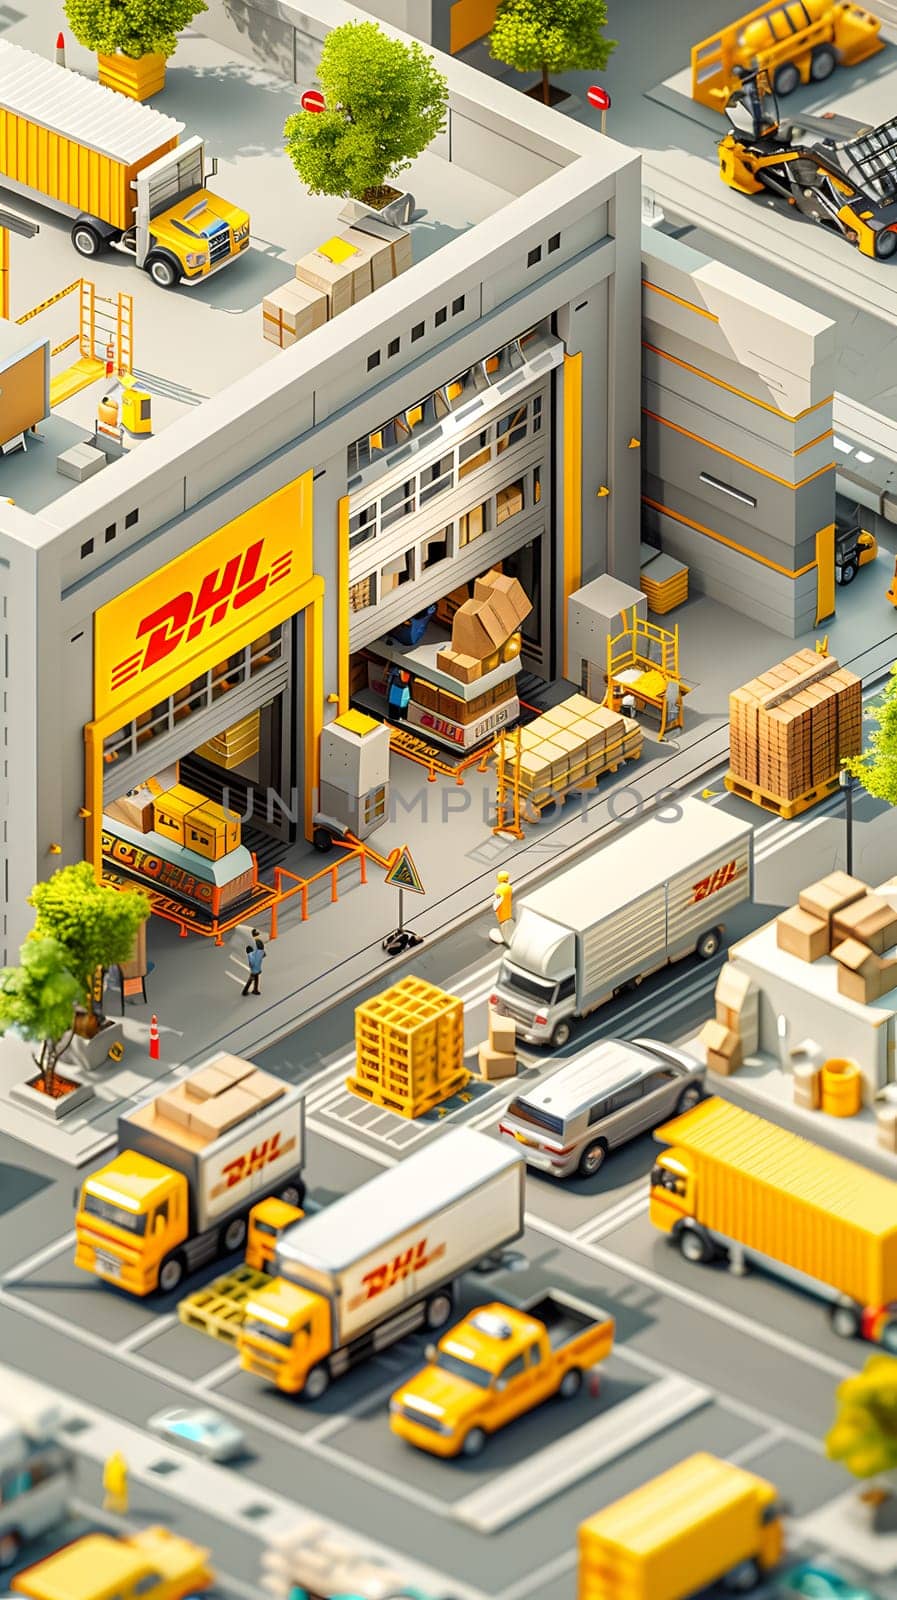 Yellow trucks and cars around DHL warehouse in urban setting by Nadtochiy